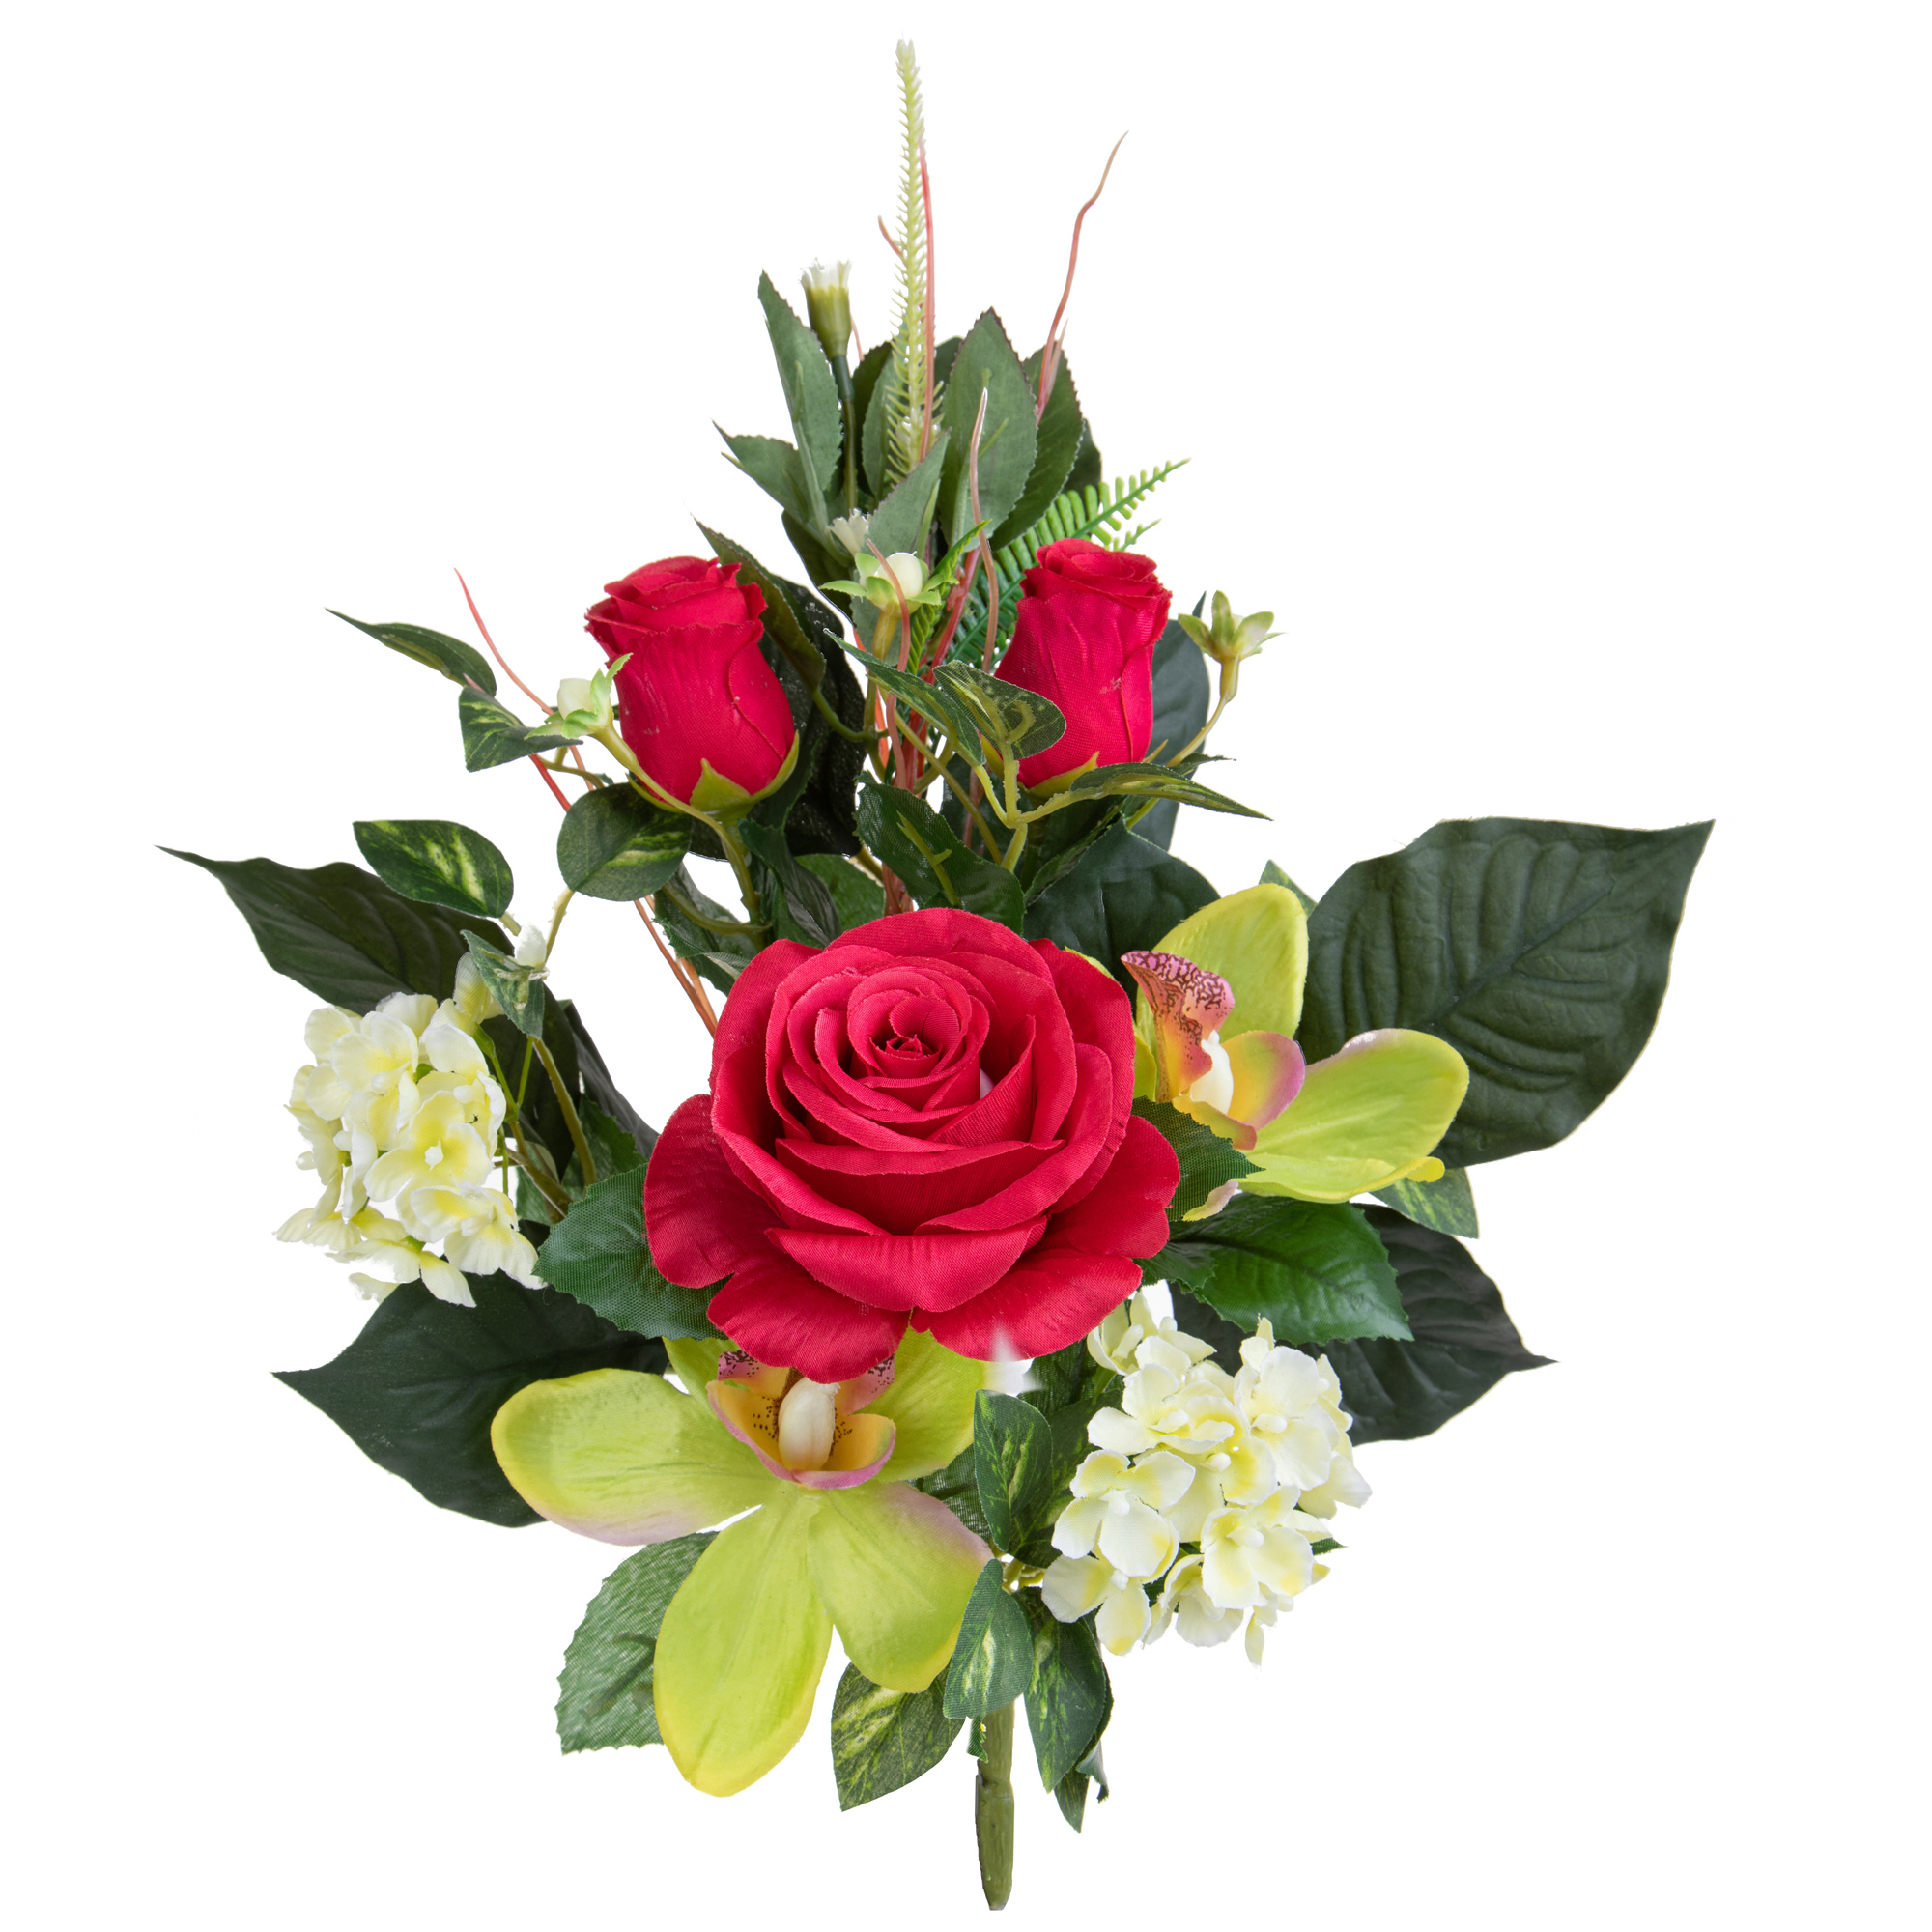 ARTIFICIAL FLOWERS, FRONTAL FLOWERED BUSHES, FRONTALE ROSE/CYMBIDIUM 43 CM